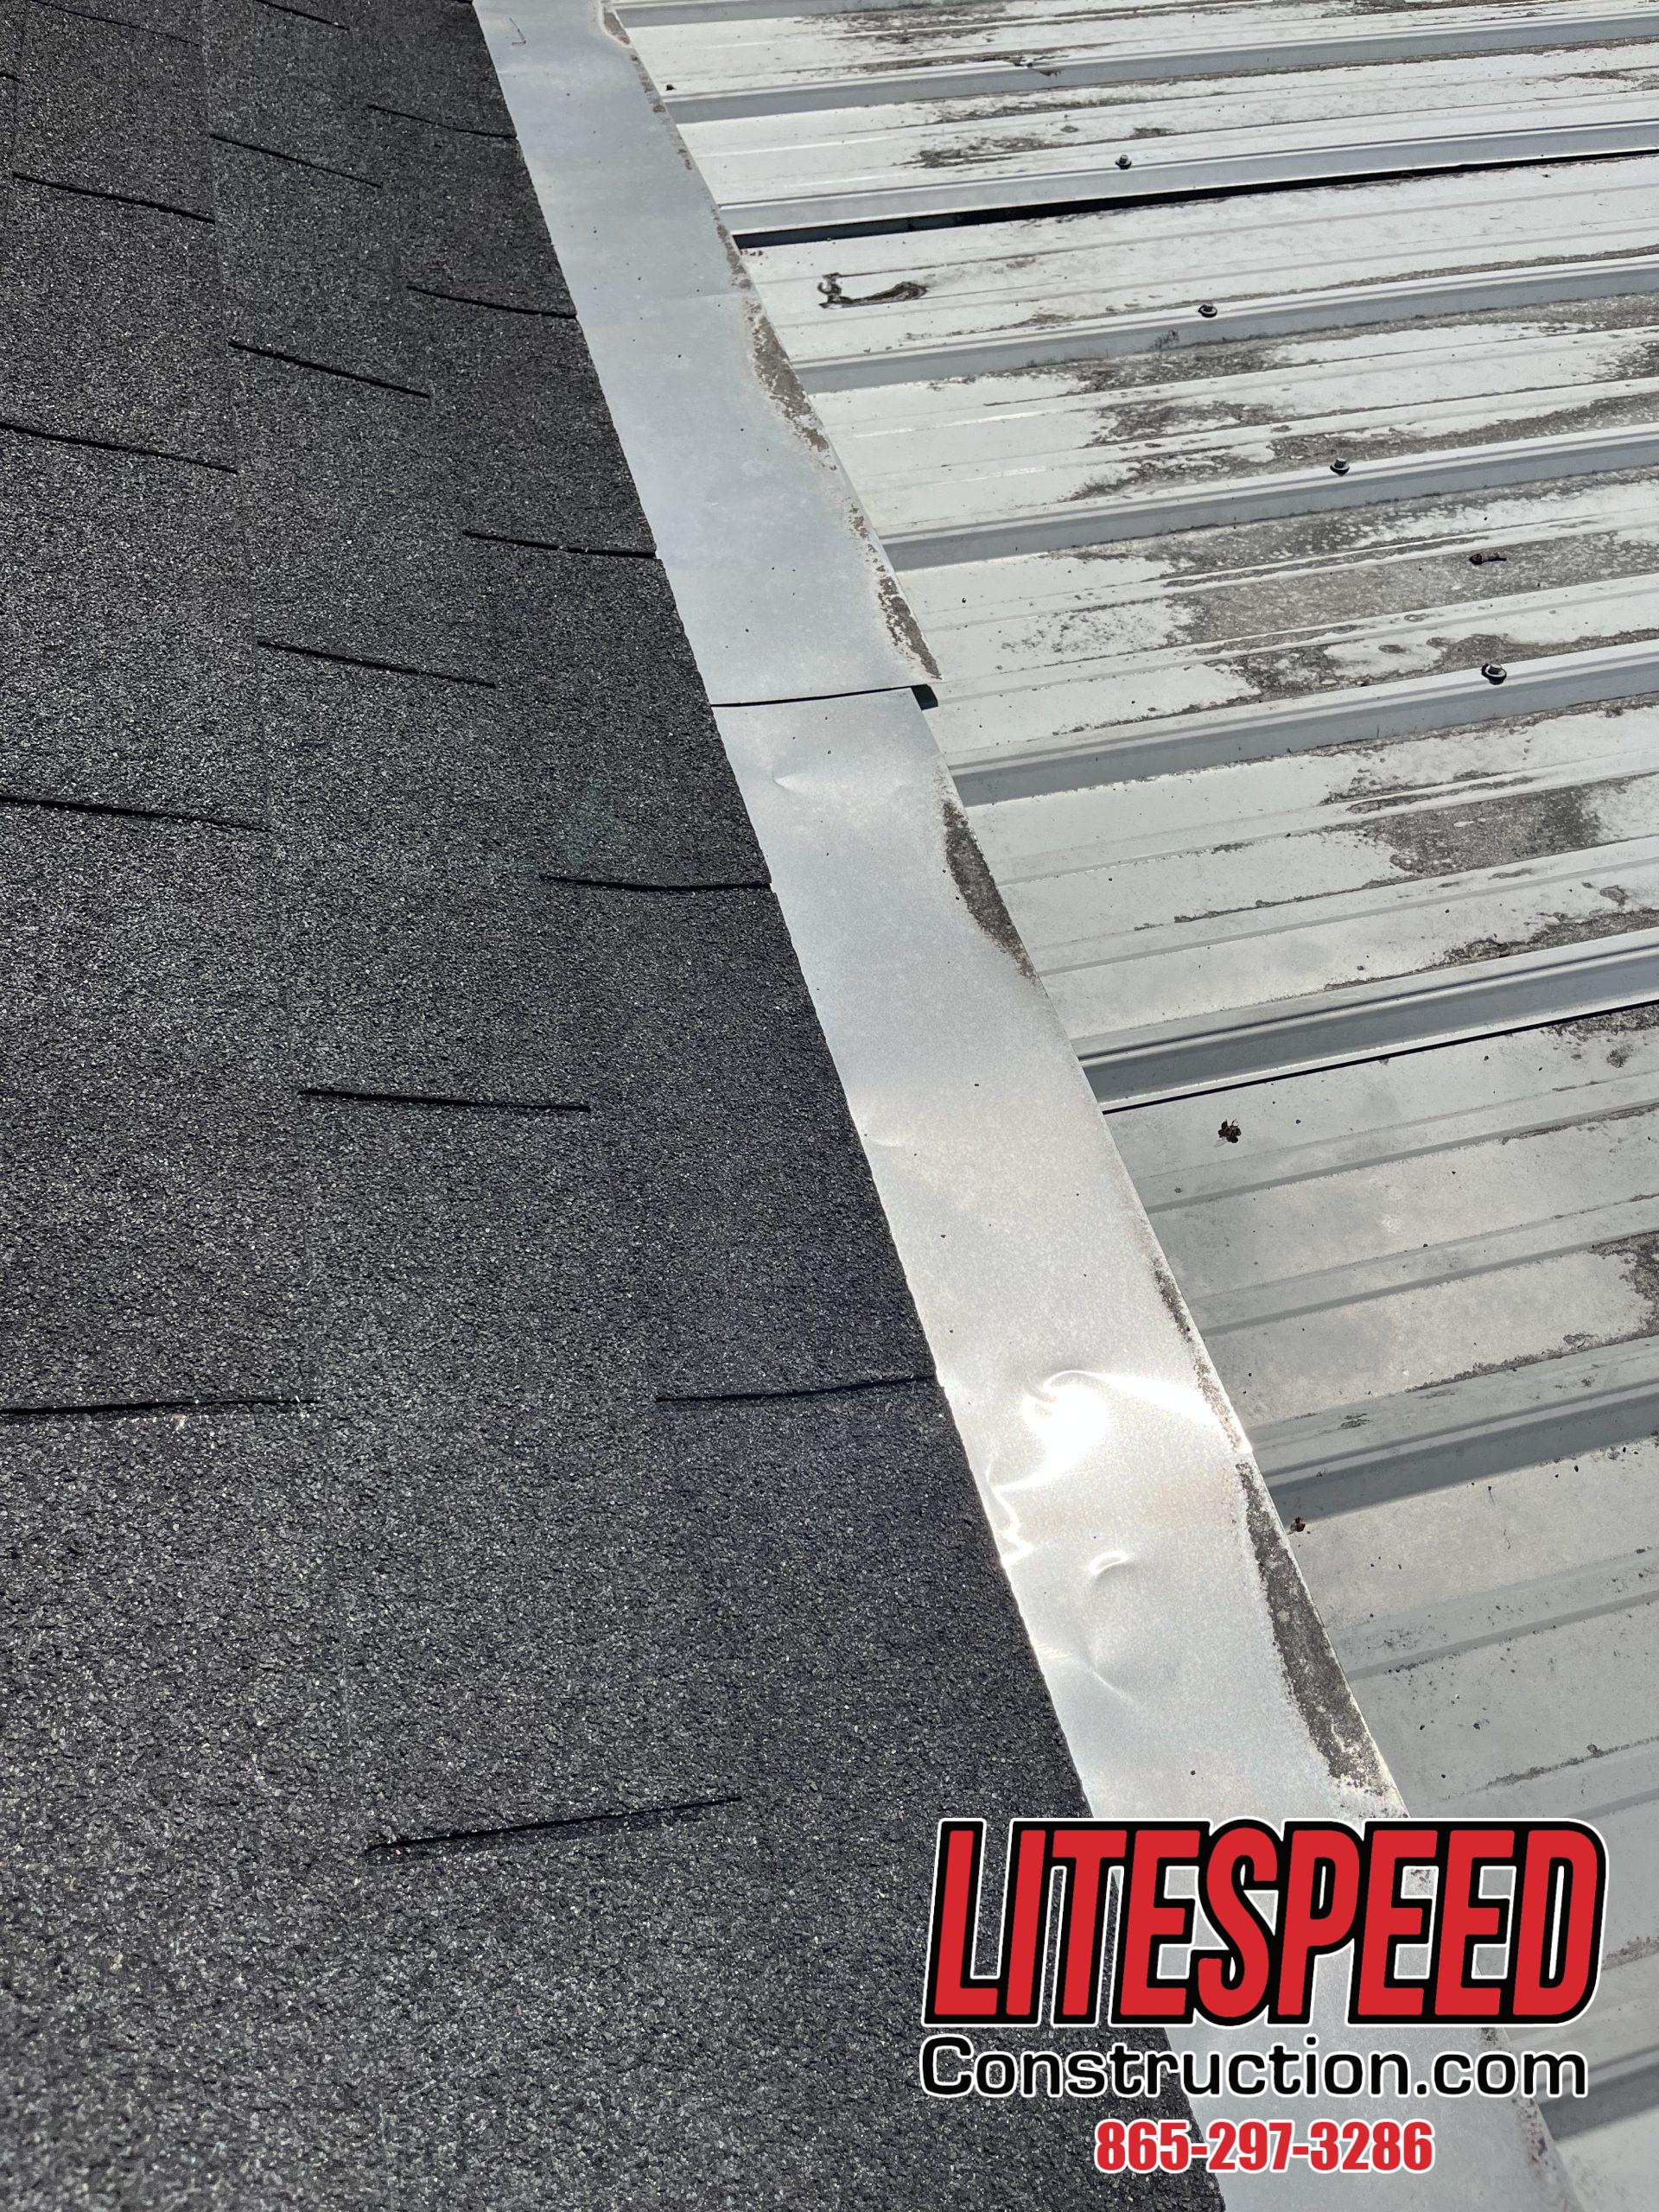 This is a picture of a metal transition from shingle to metal roofing